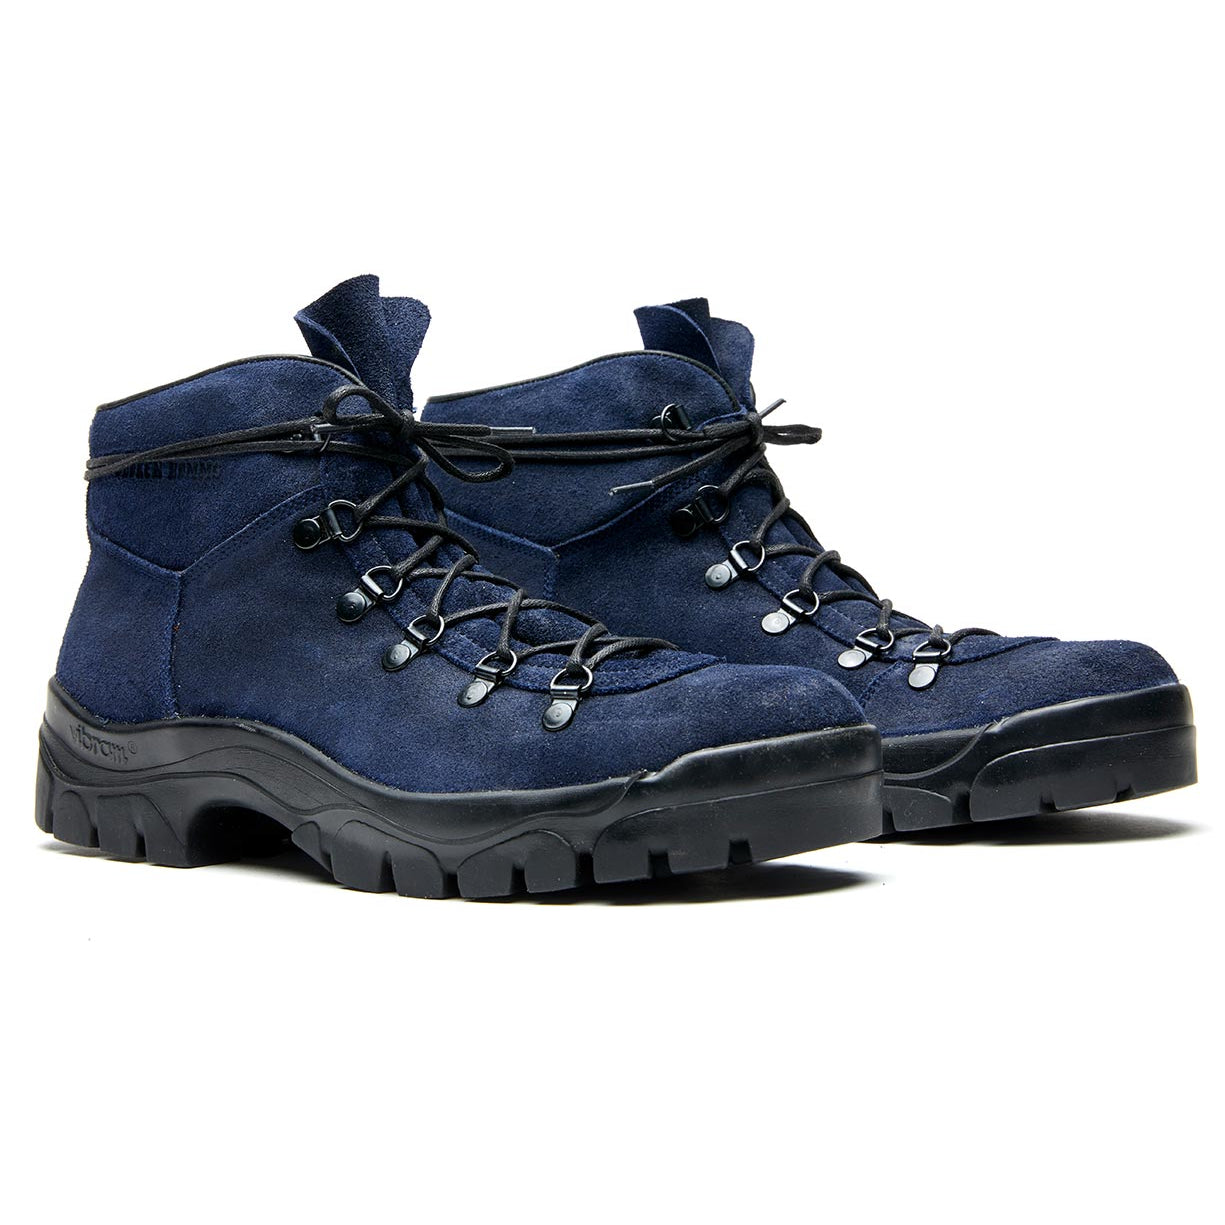 A pair of Weber hiking boots with a crossover boot design by Broken Homme on a white background.